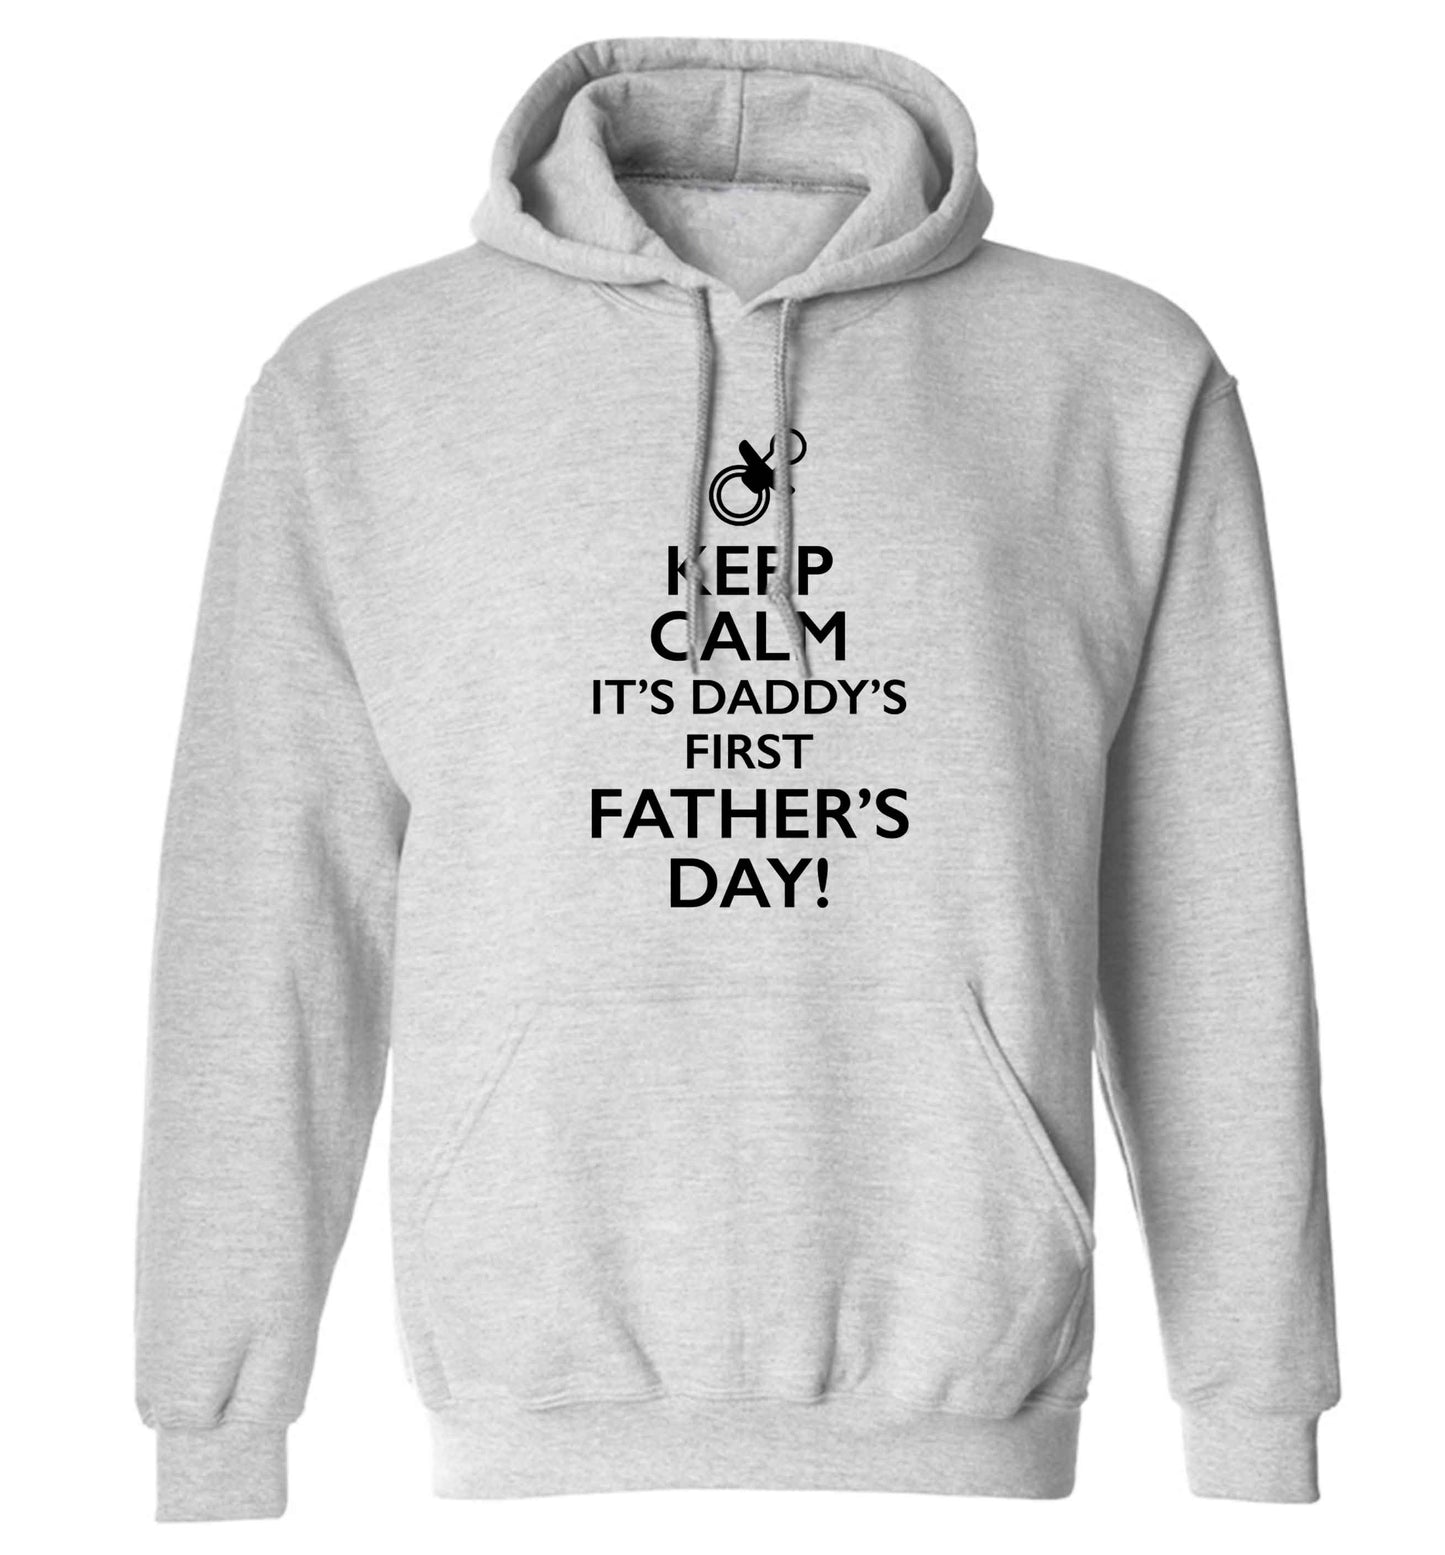 Keep calm it's daddys first father's day adults unisex grey hoodie 2XL